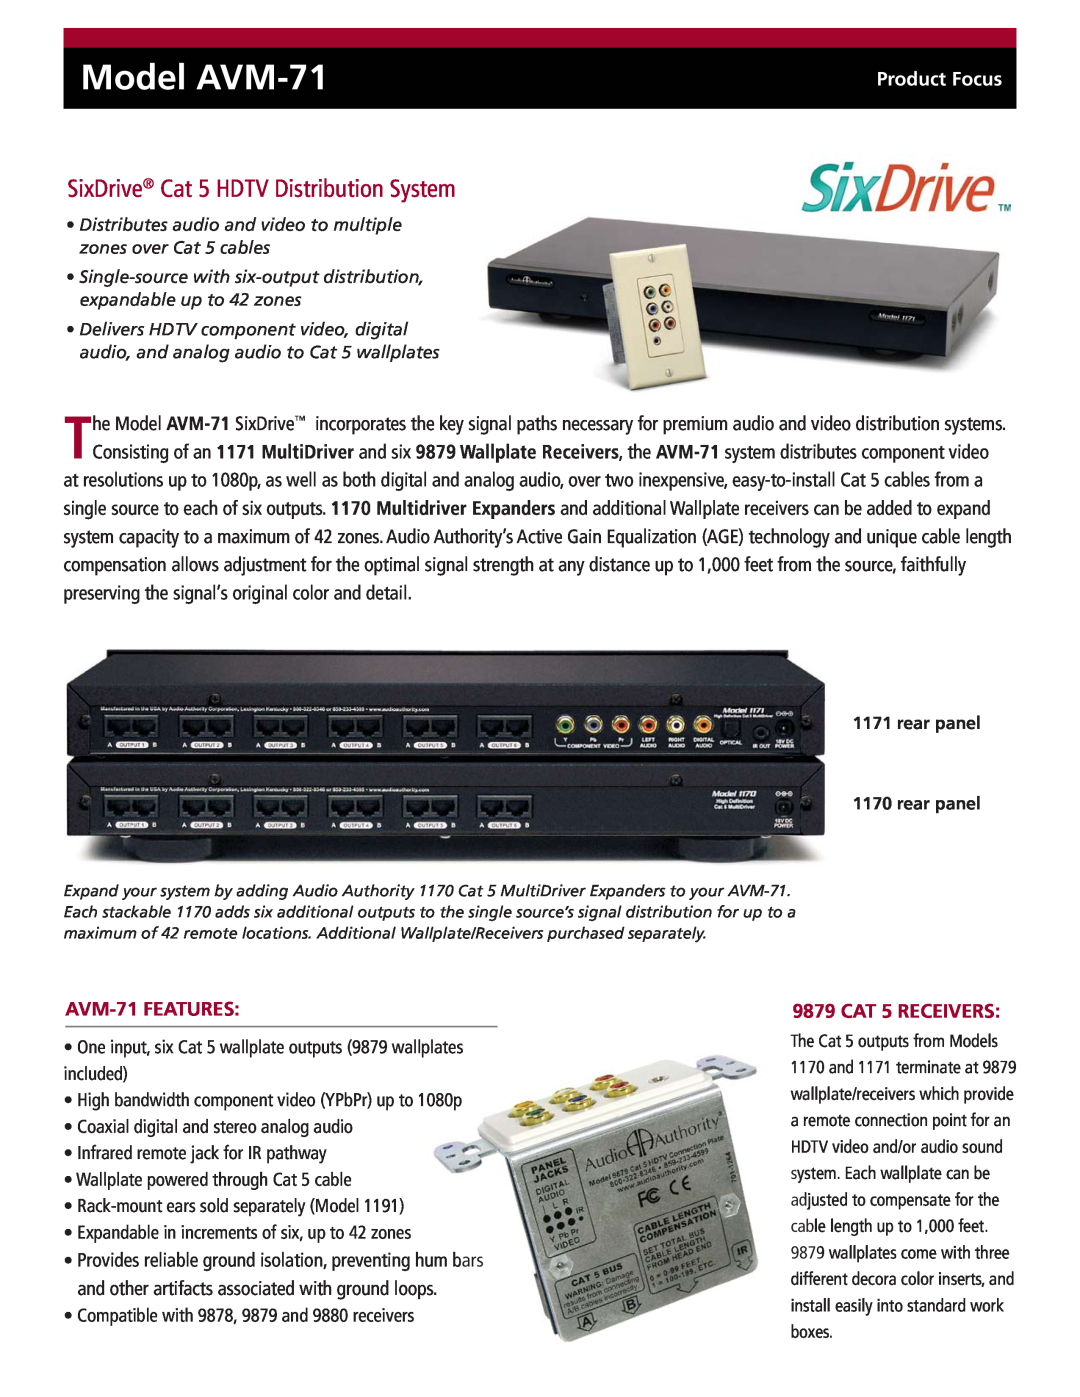 Audio Authority manual SixDrive Cat 5 HDTV Distribution System, AVM-71FEATURES, CAT 5 RECEIVERS, Model AVM-71 